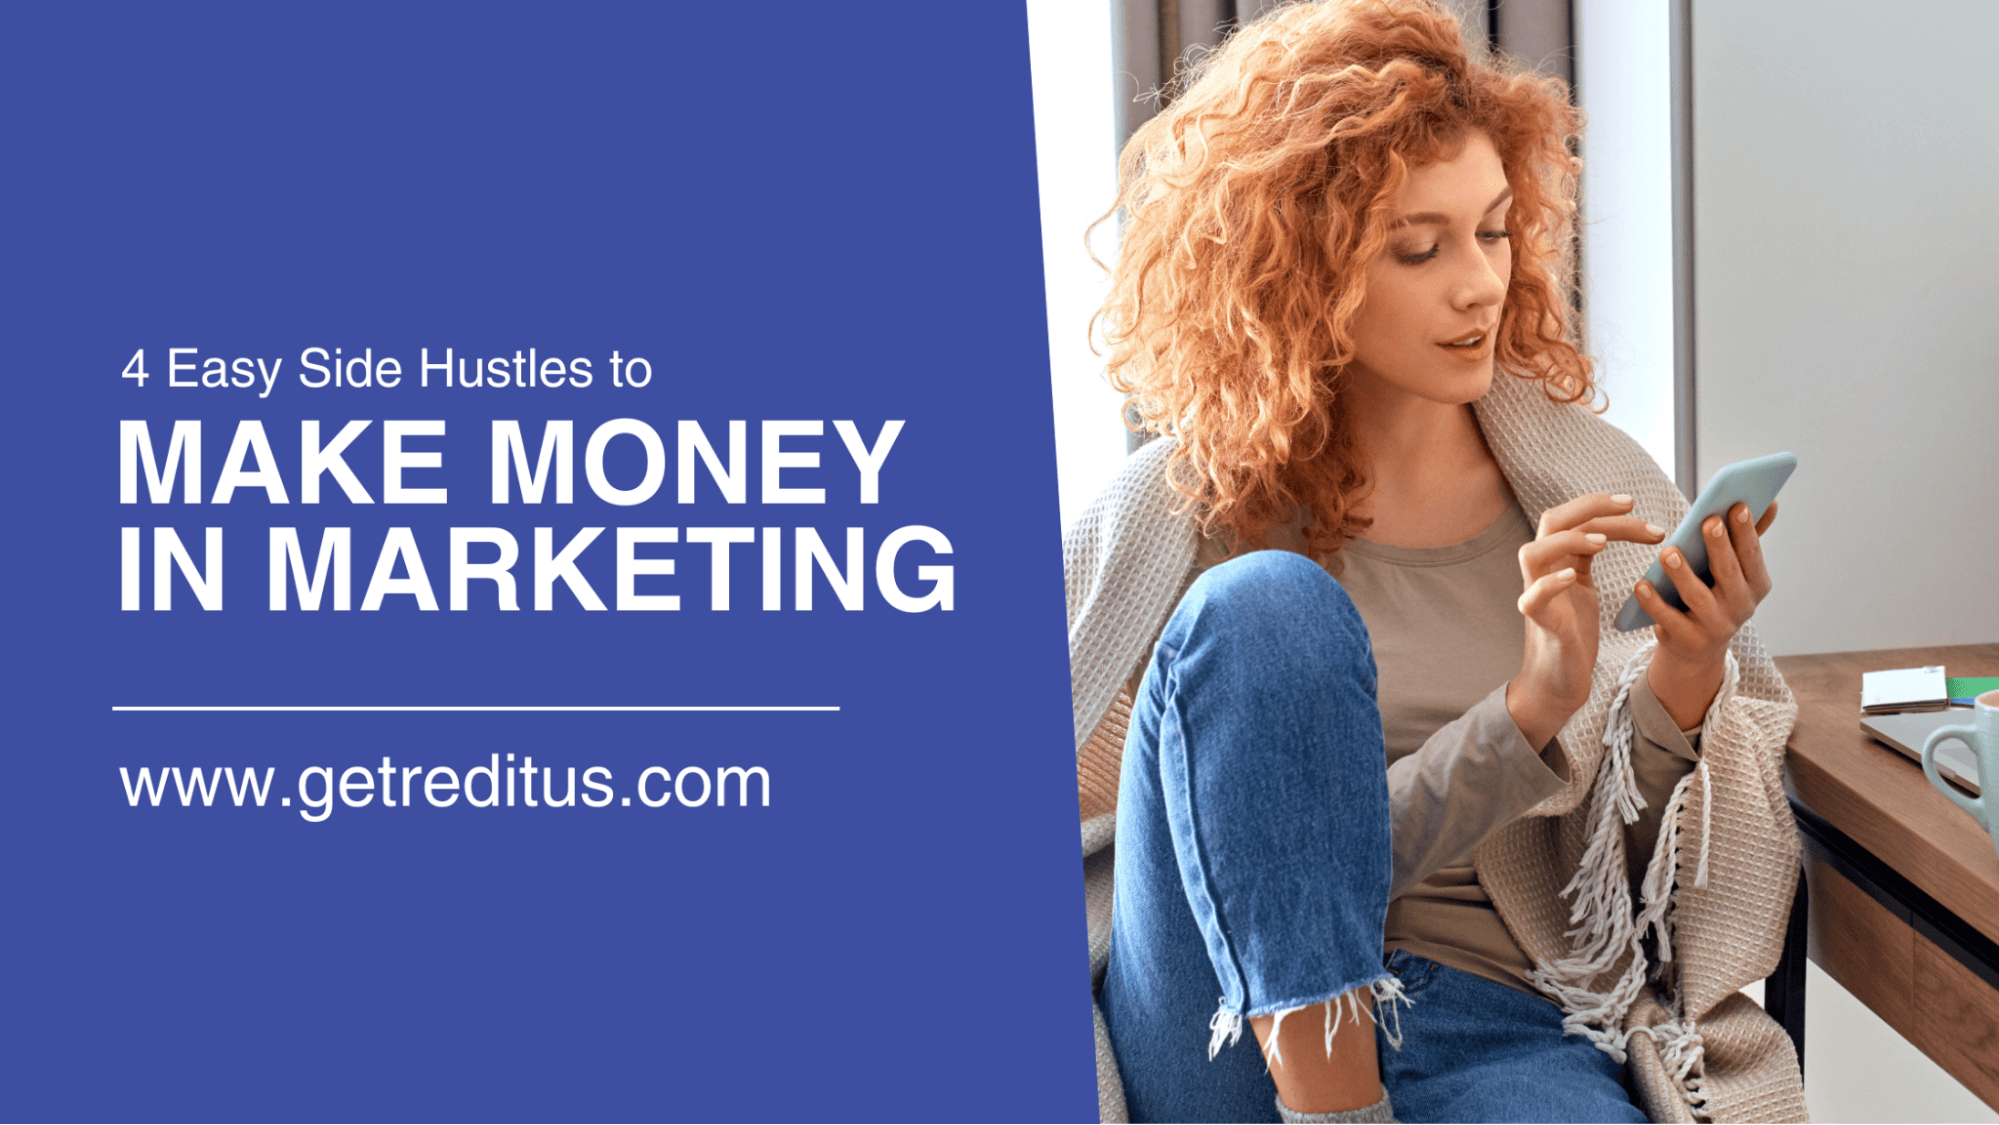 4 Easy Side Hustles to Make Extra Money in Marketing